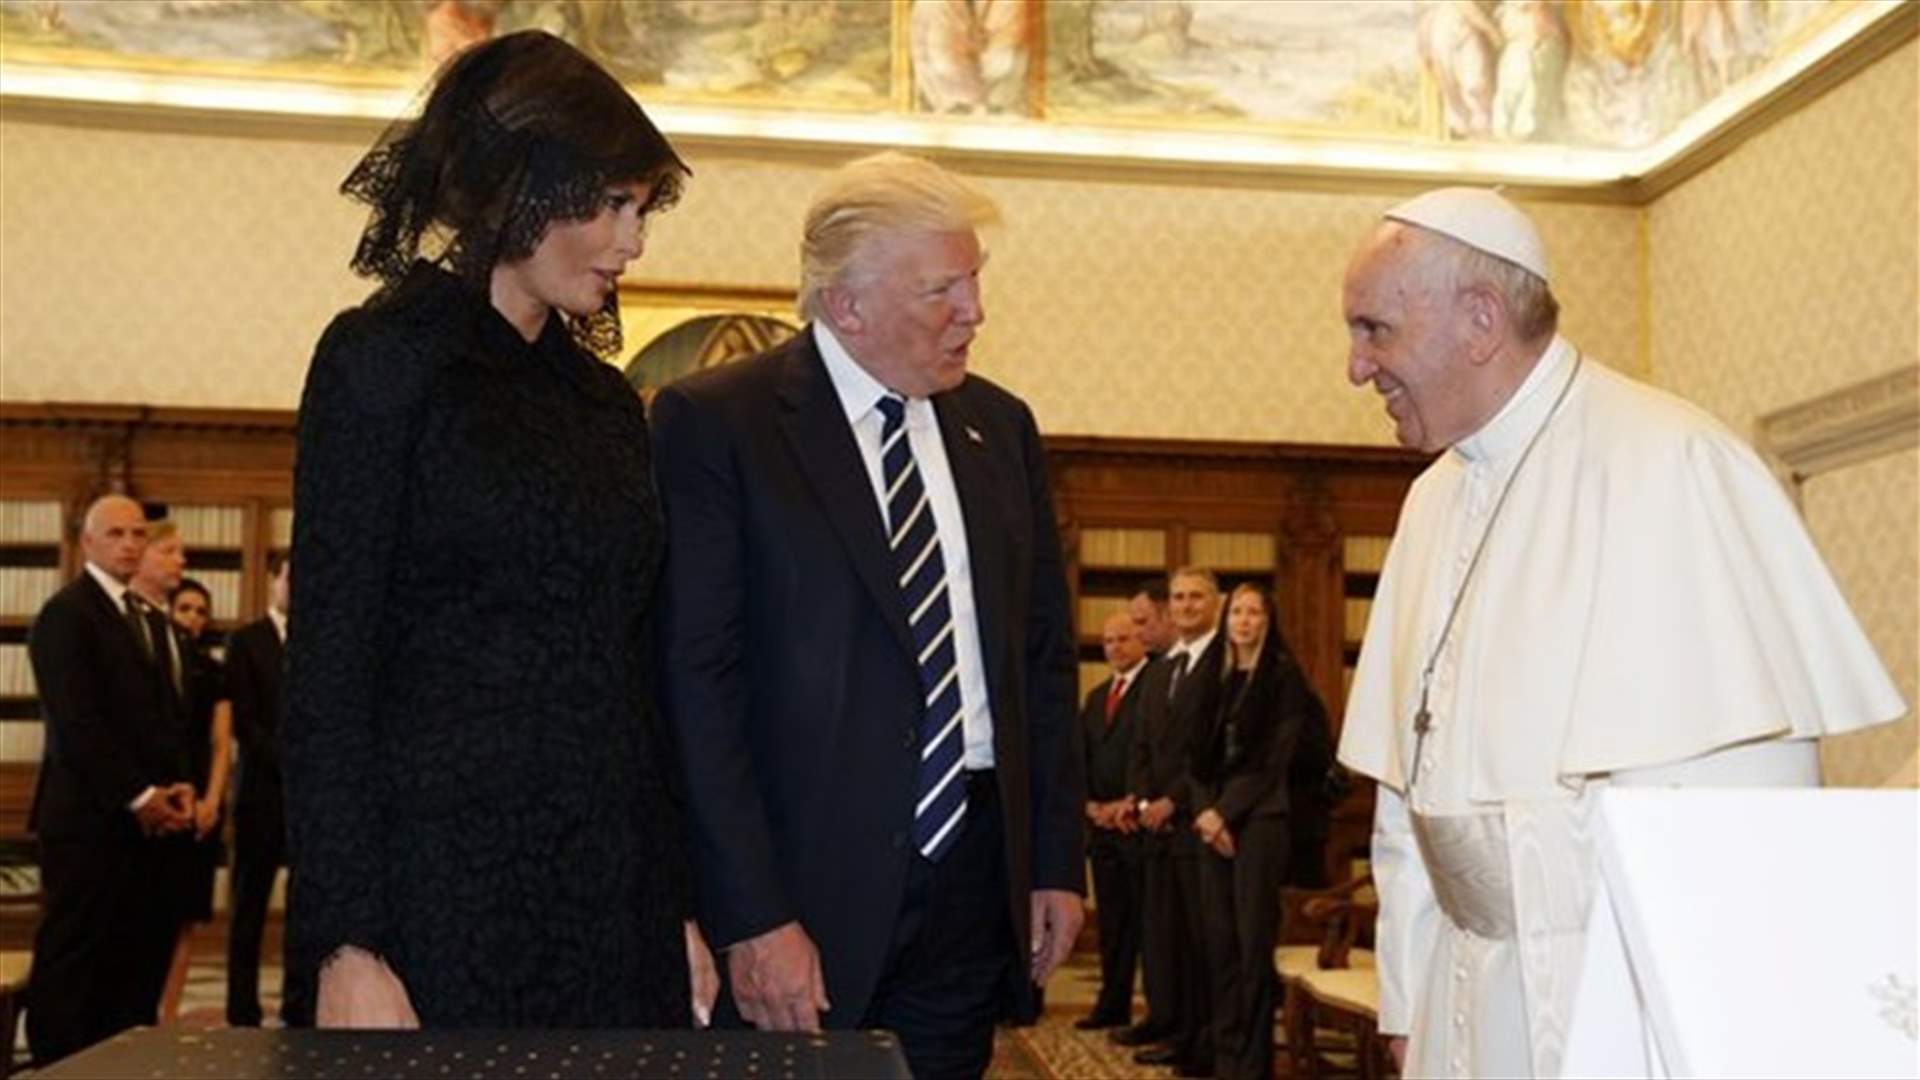 Pope asks Trump to be peacemaker, gives him environmental letter